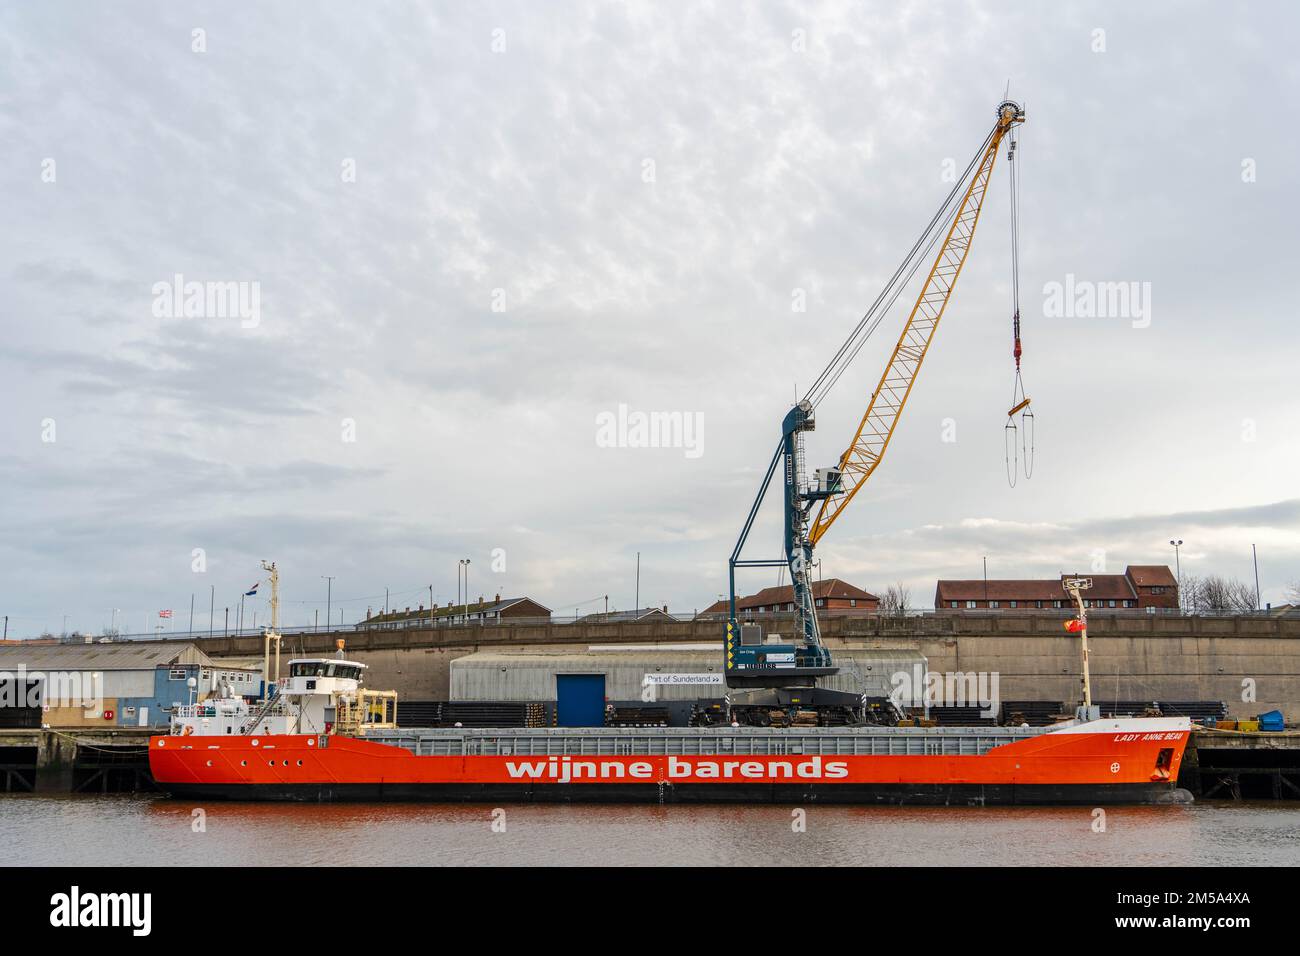 The Lady Anne Beau part of the Wijnne Barends fleet of ships, docked at Port of Sunderland, UK Stock Photo